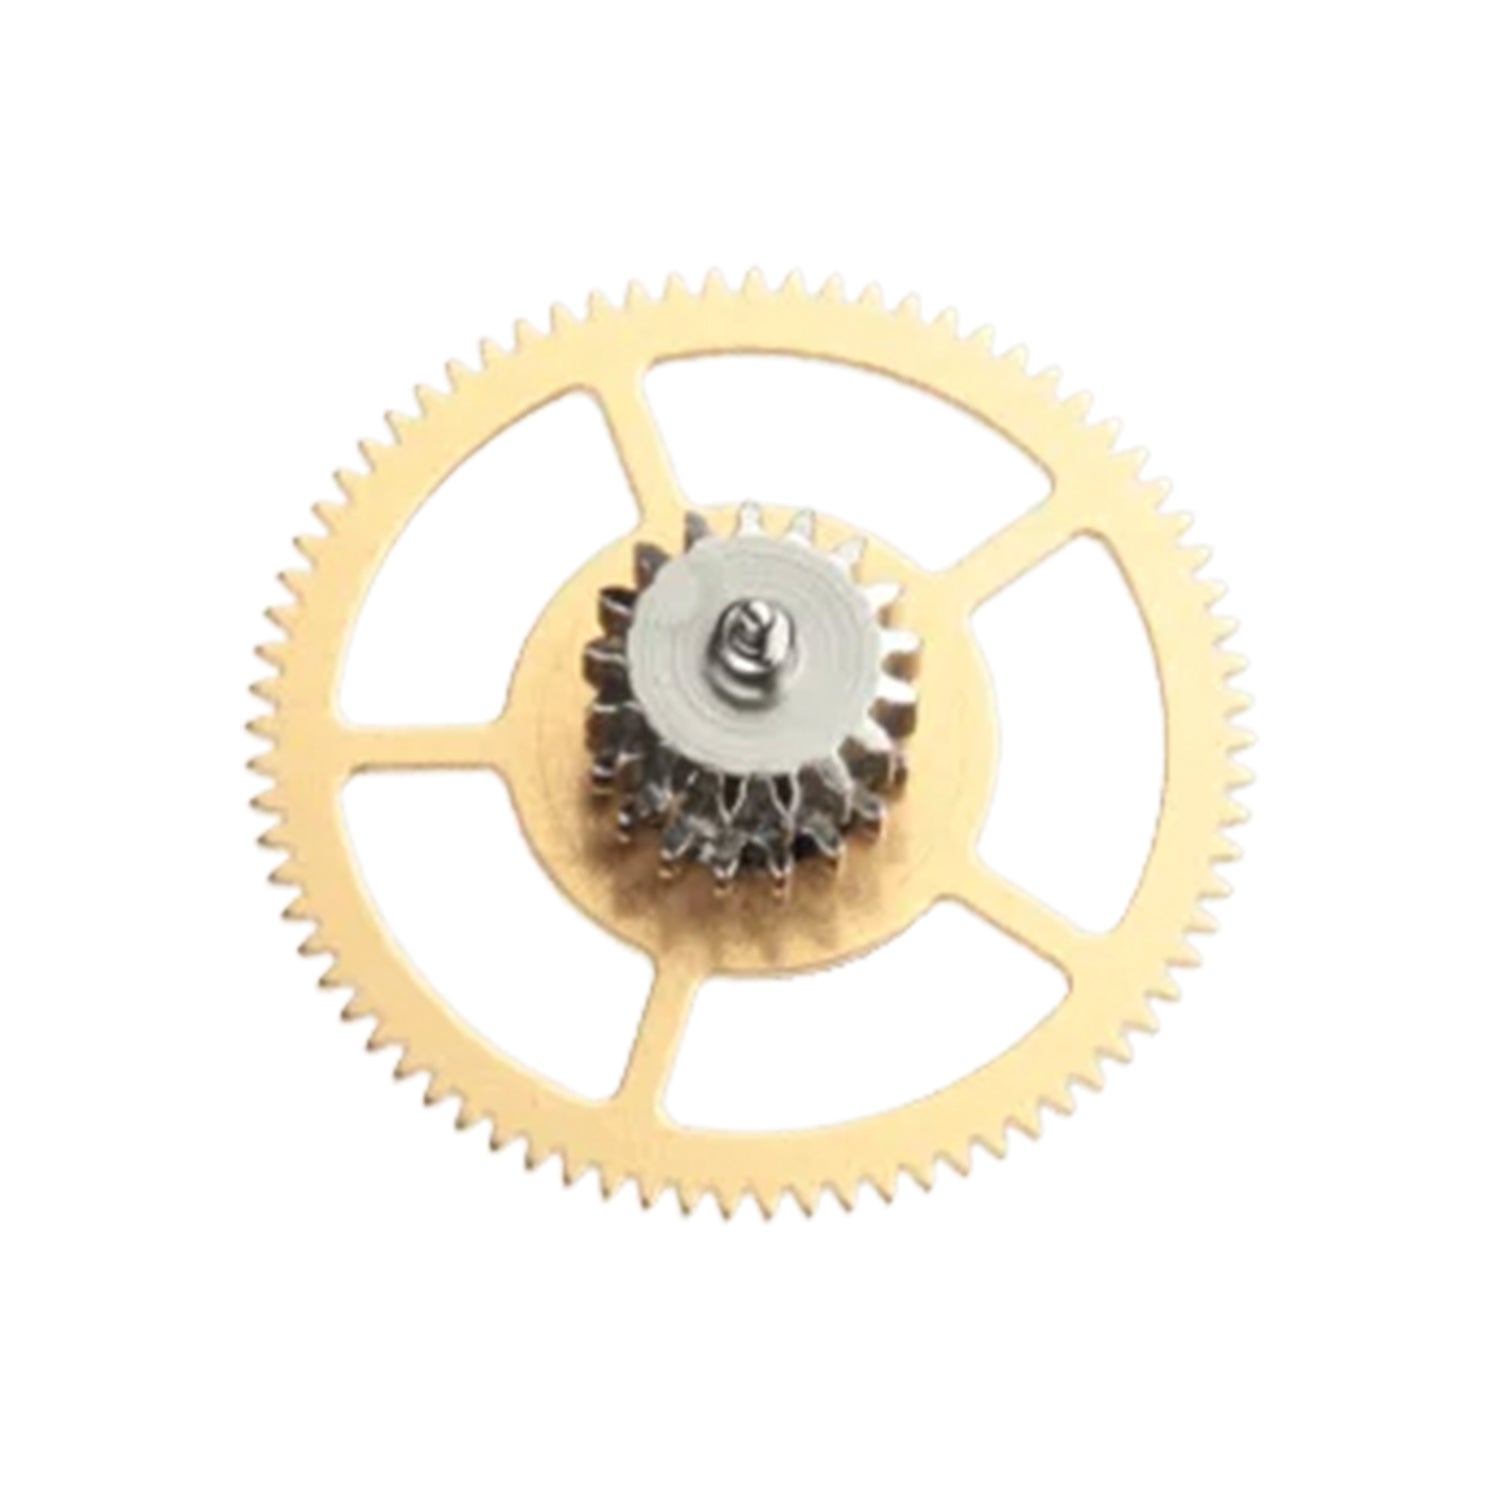 Internal Replacement Watch Parts for ETA 2892-2